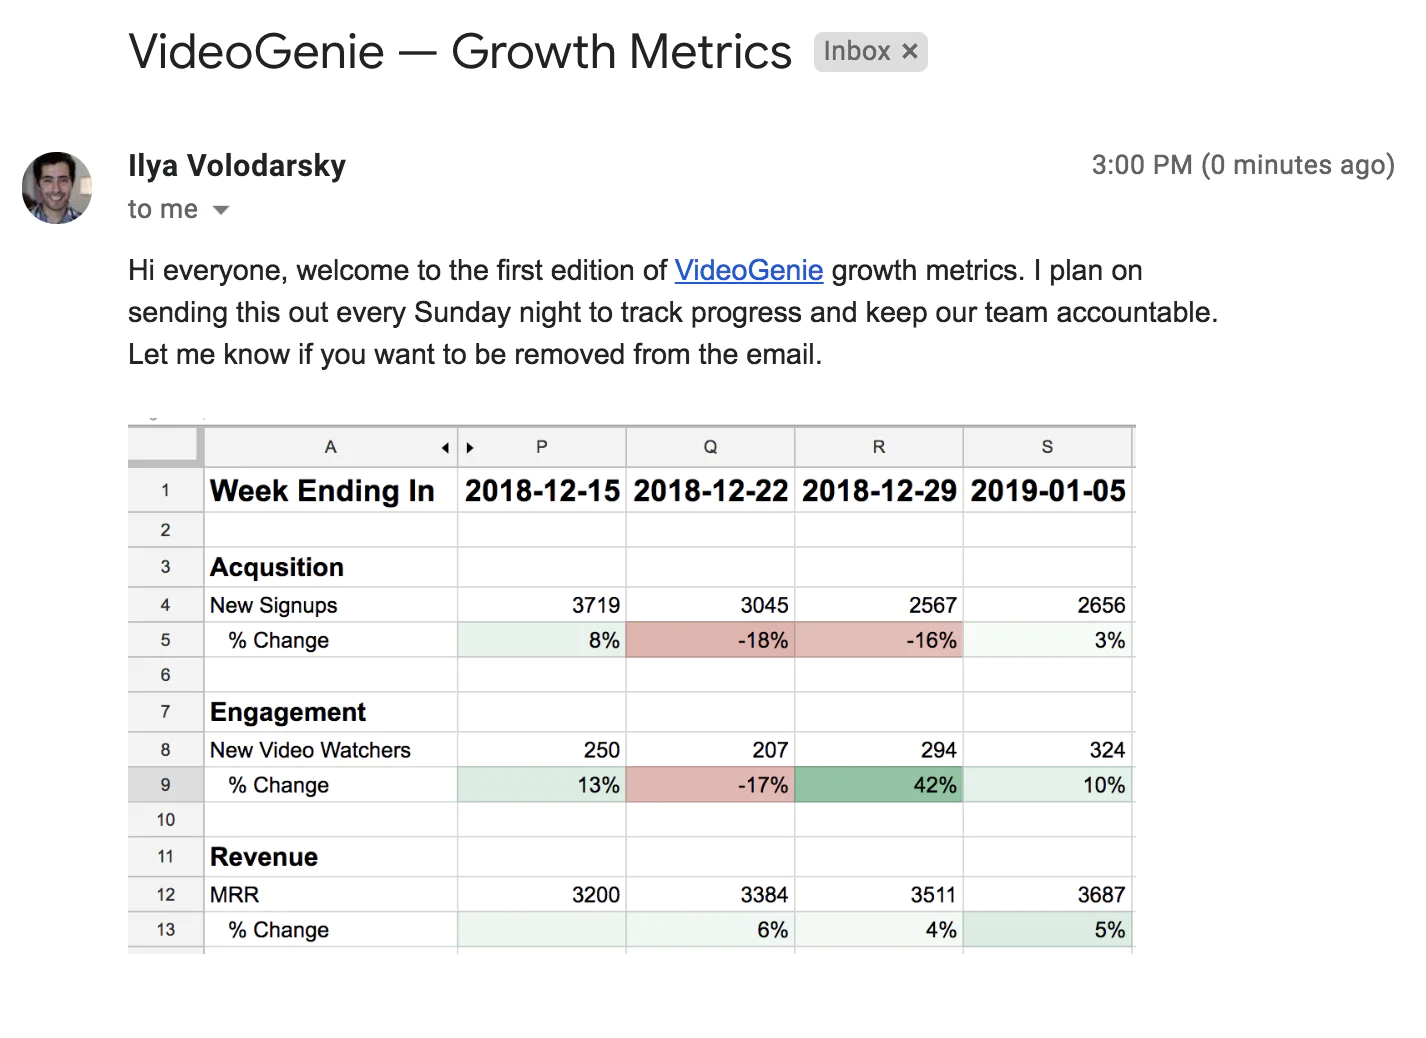 VideoGenie example of investor email